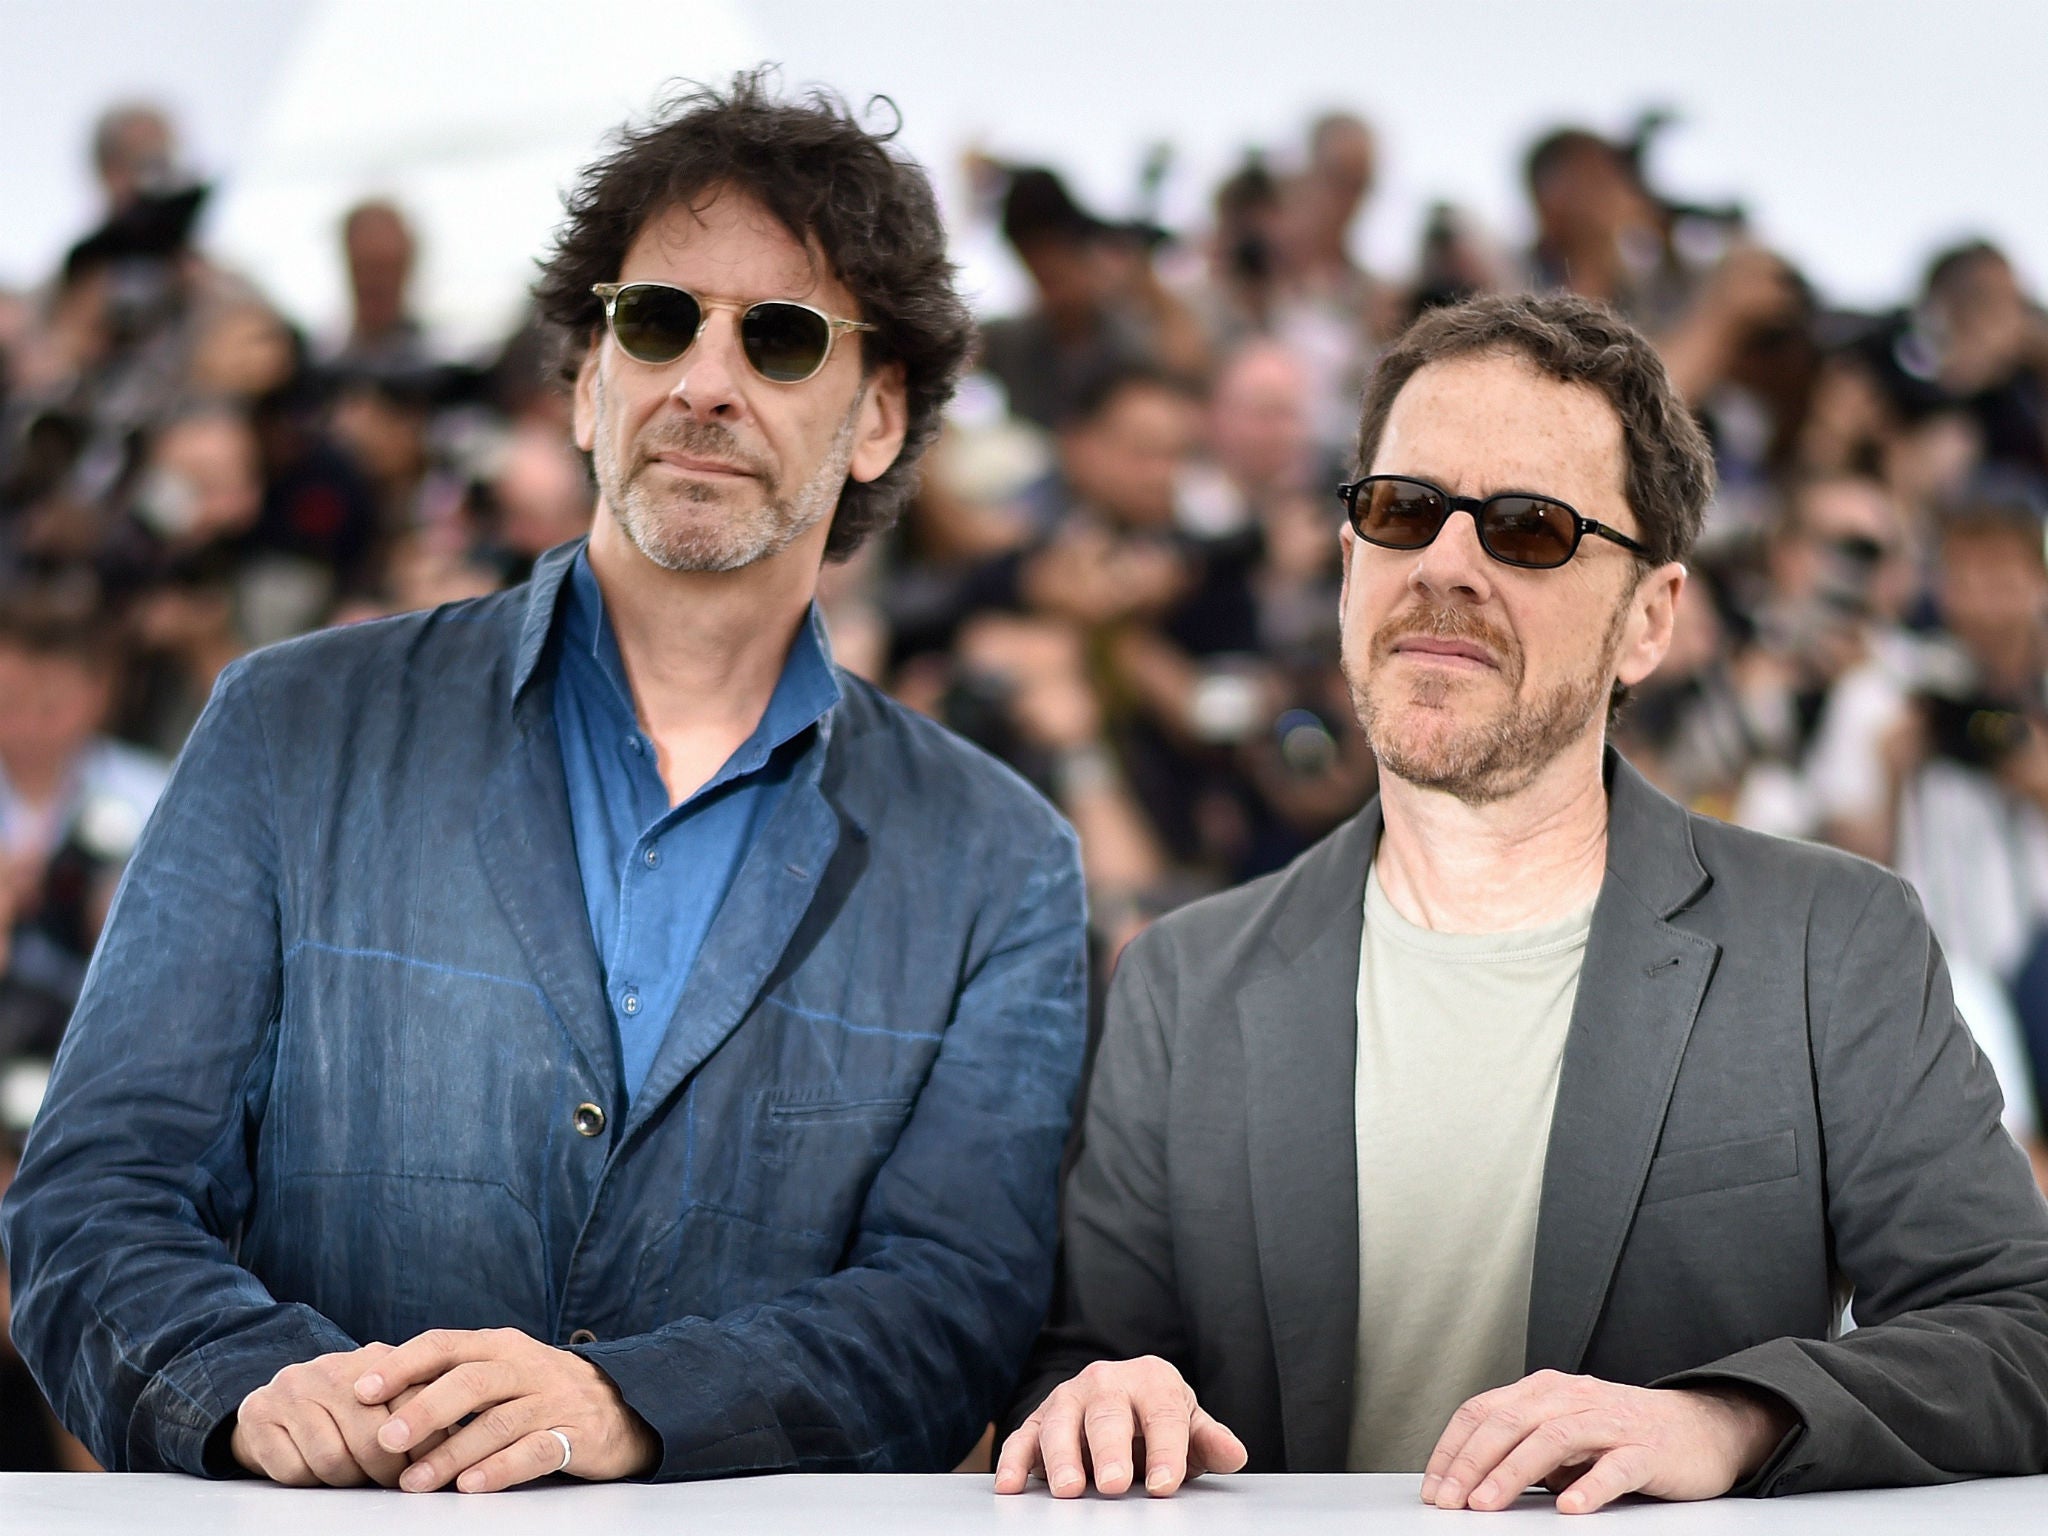 Joel and Ethan Coen 'wouldn't know where to start' if they moved to direct a TV series